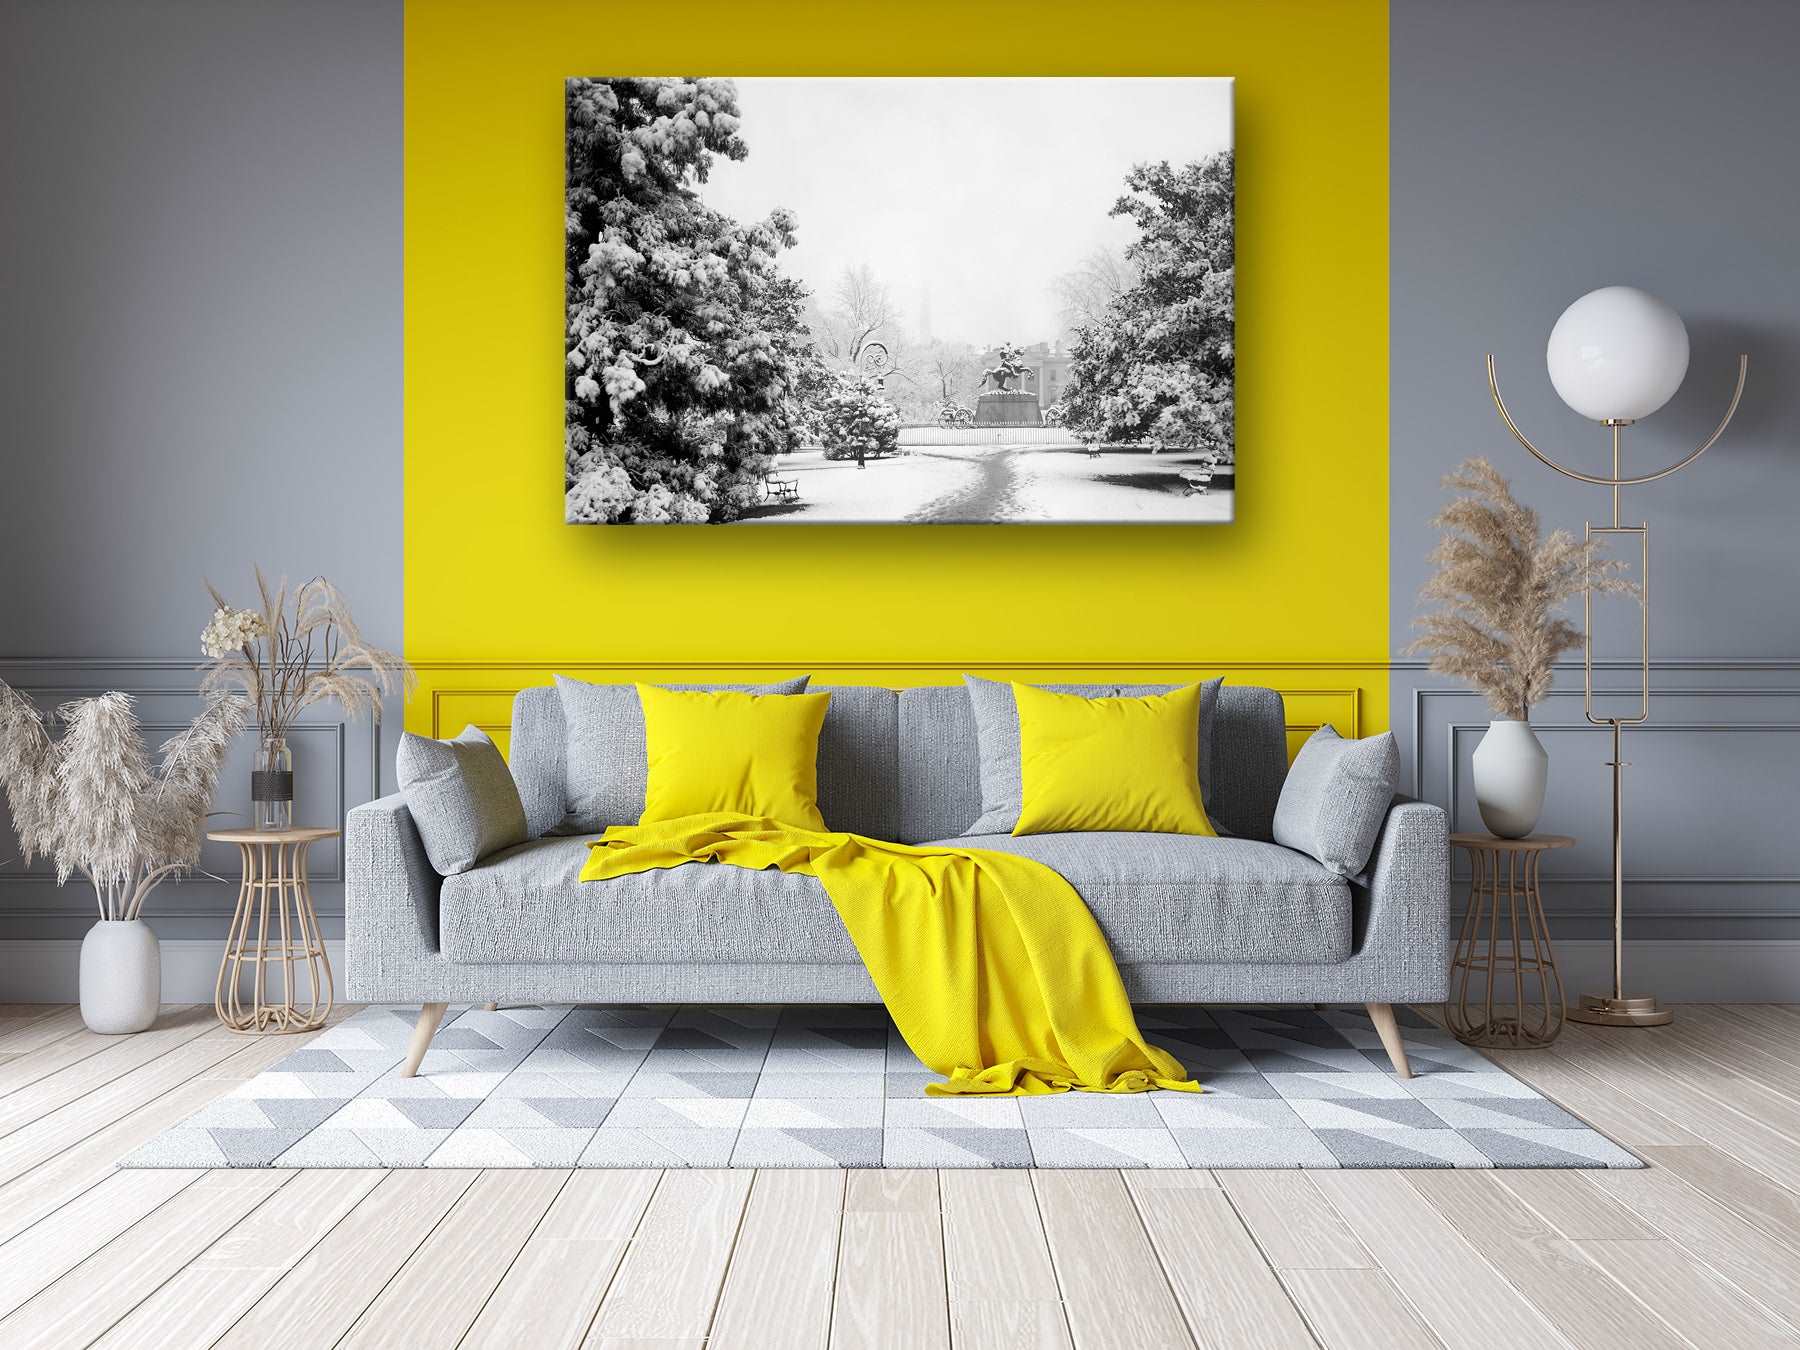 A photograph of a living room with a bright yellow wall and a canvas print of a vintage photograph of Lafayette Park